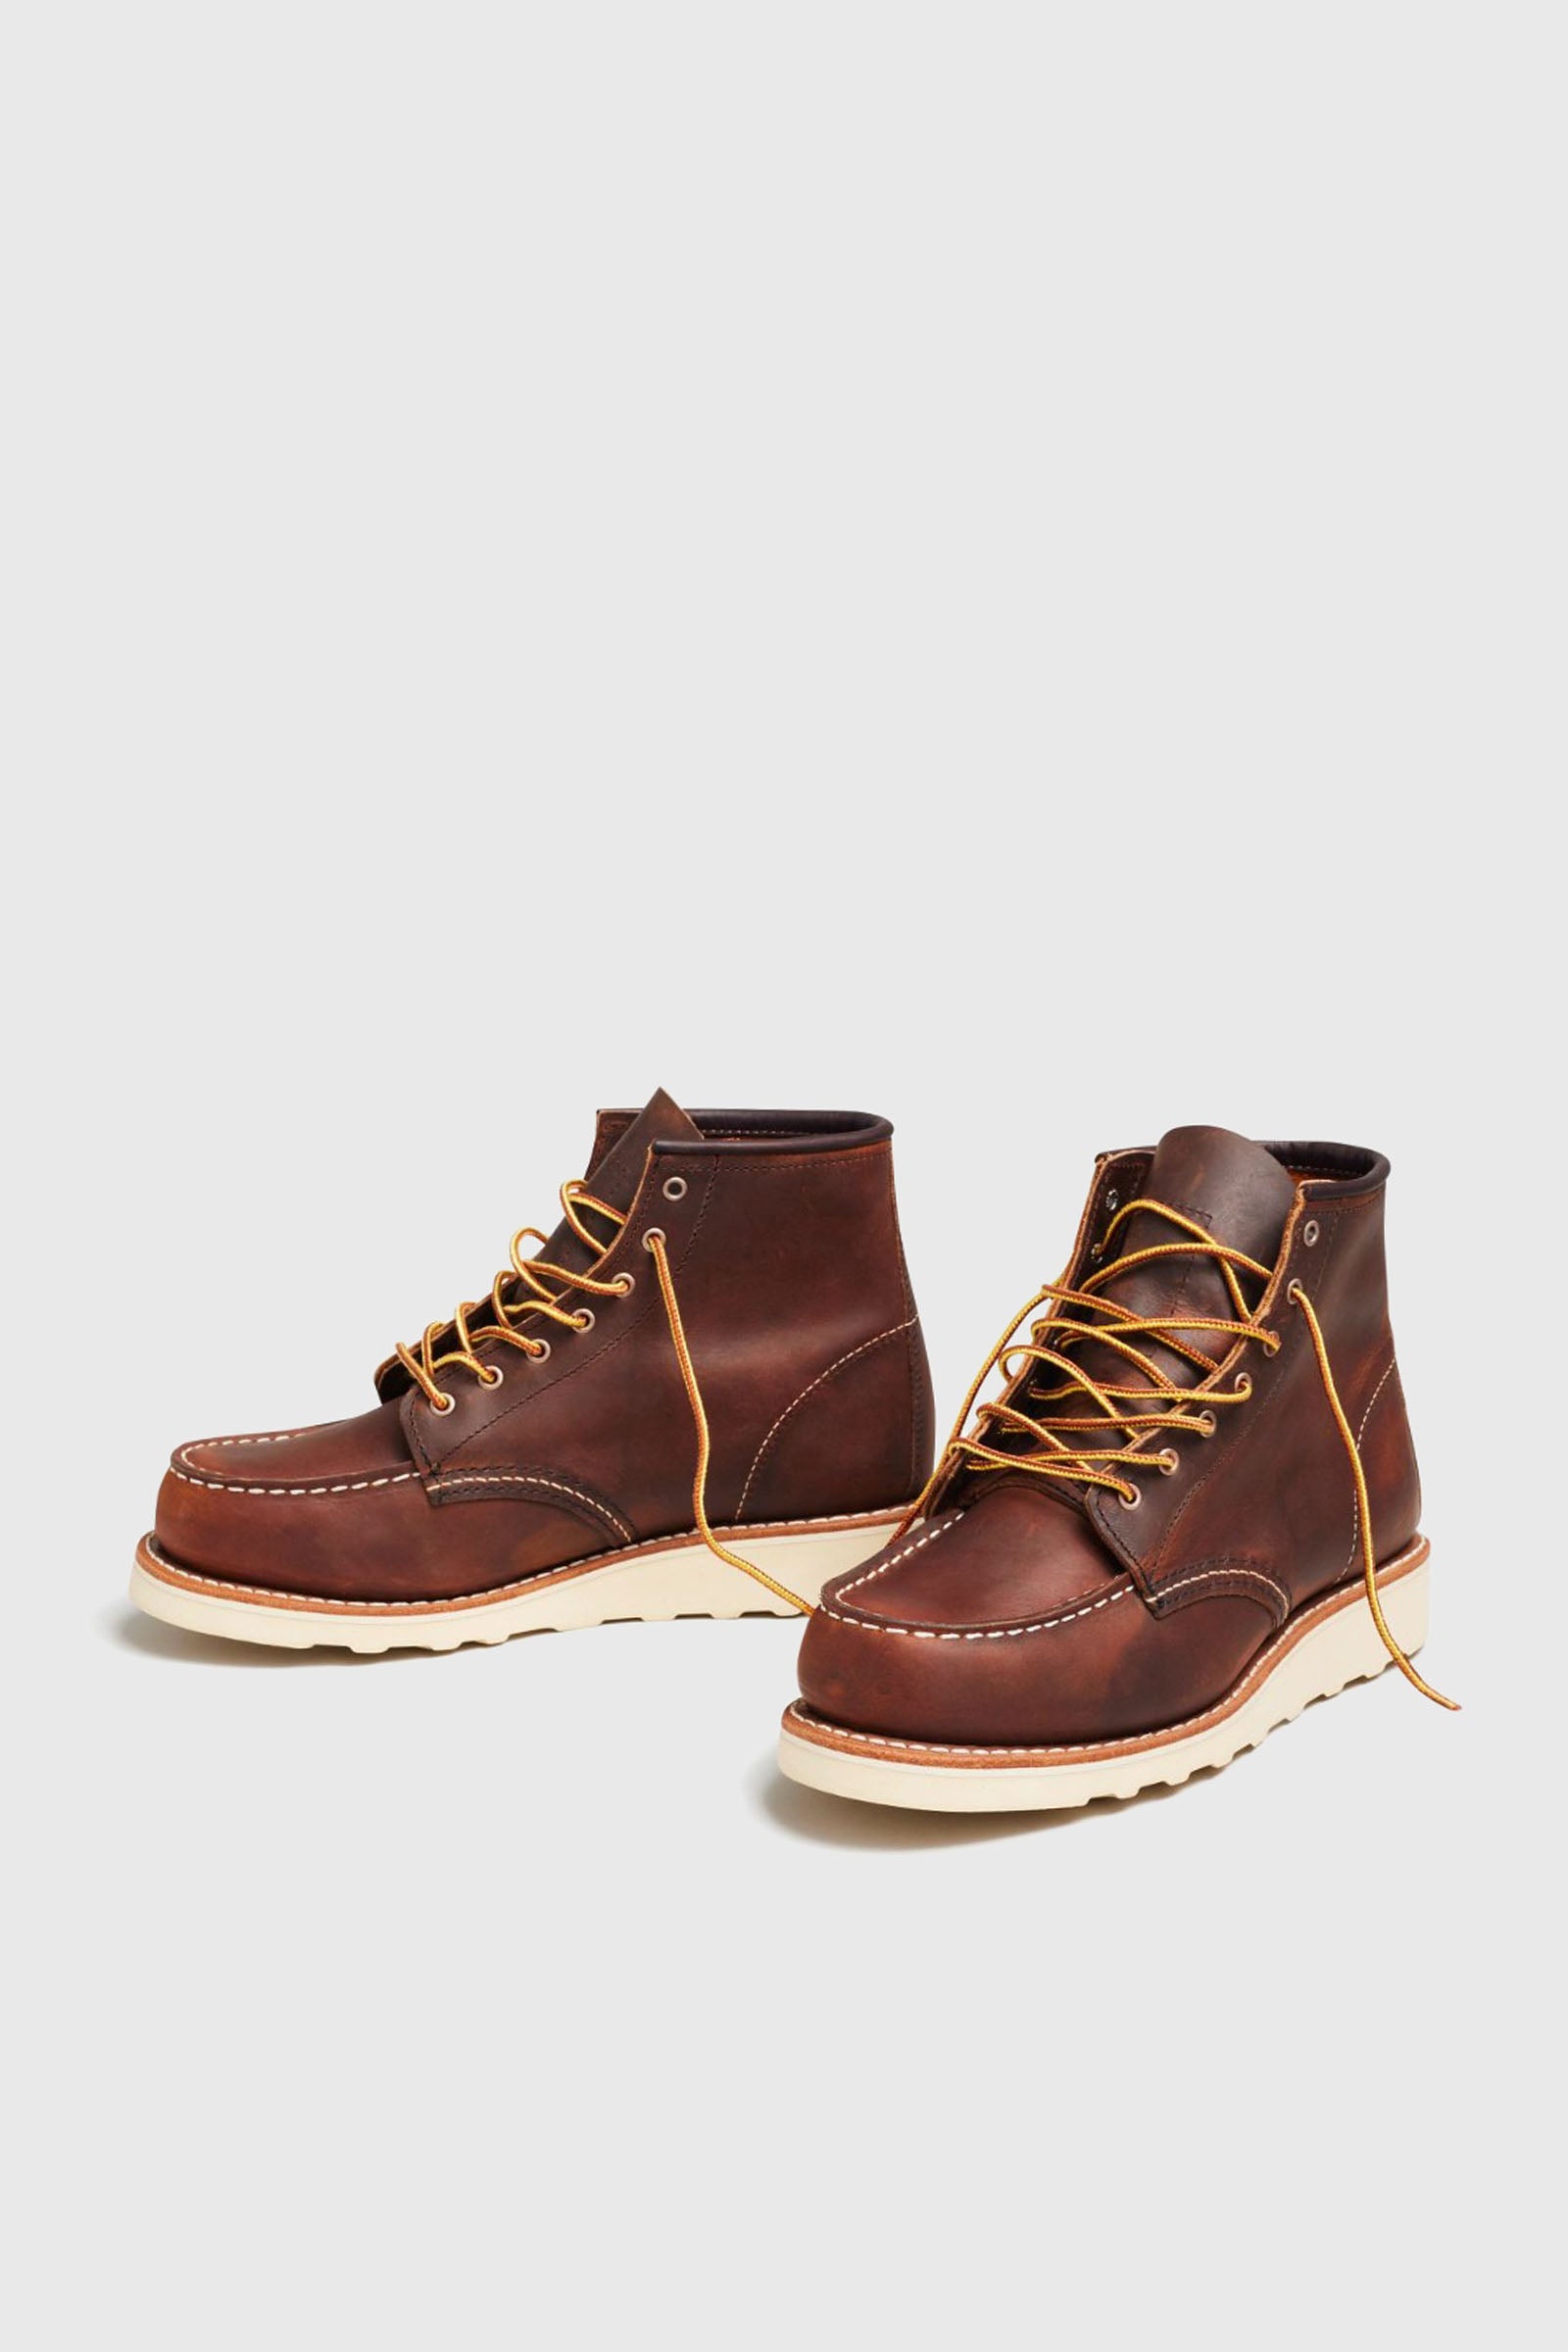 Red Wing Shoes 6-Inch Classic Moc Brown Leather - 4